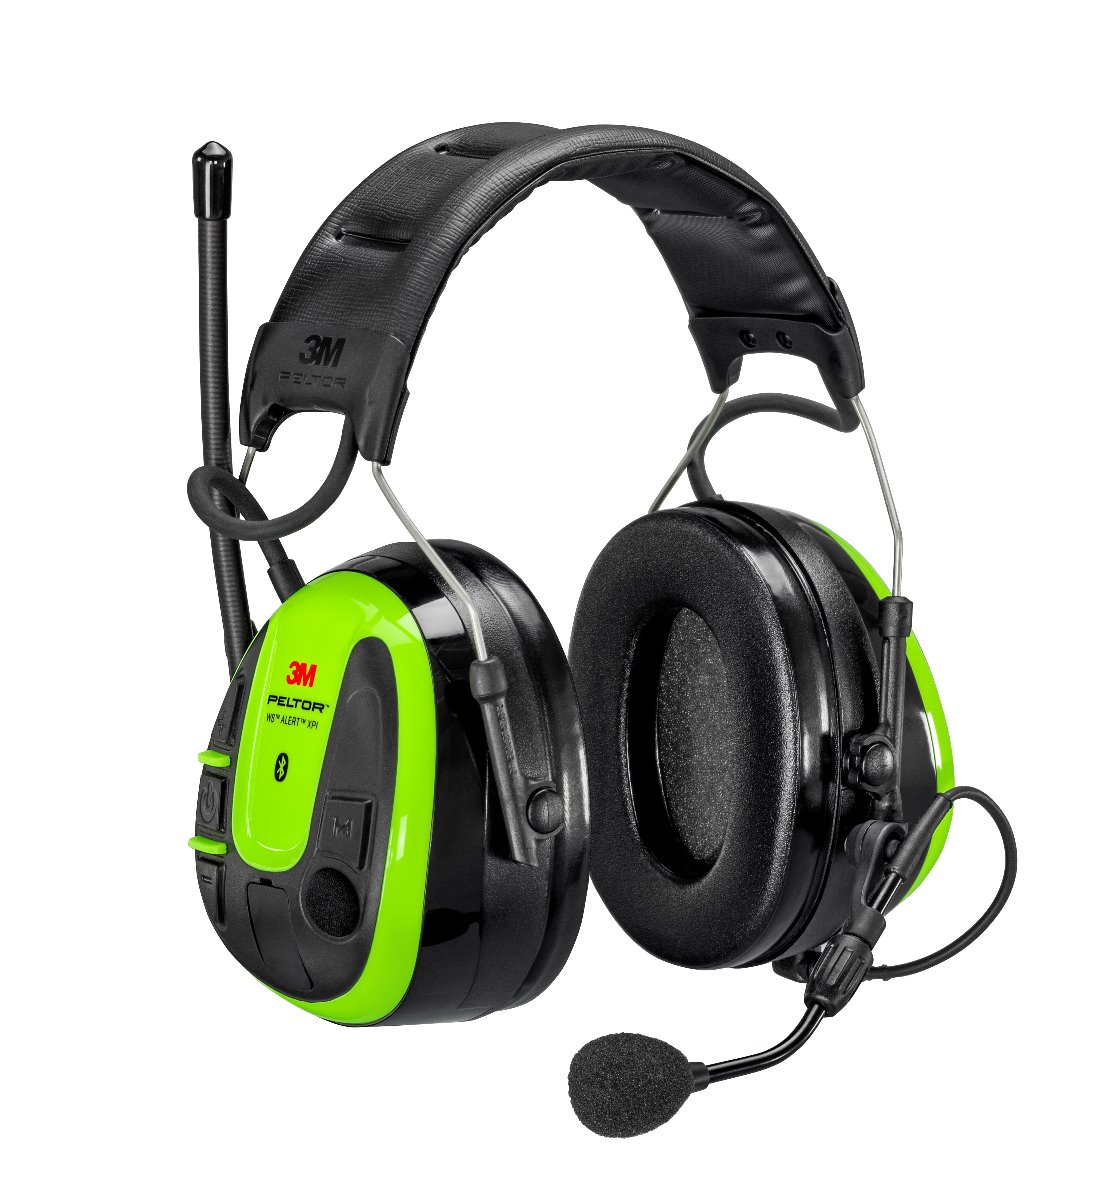 3M XP1 Headsets now have an App, making them even quicker to use